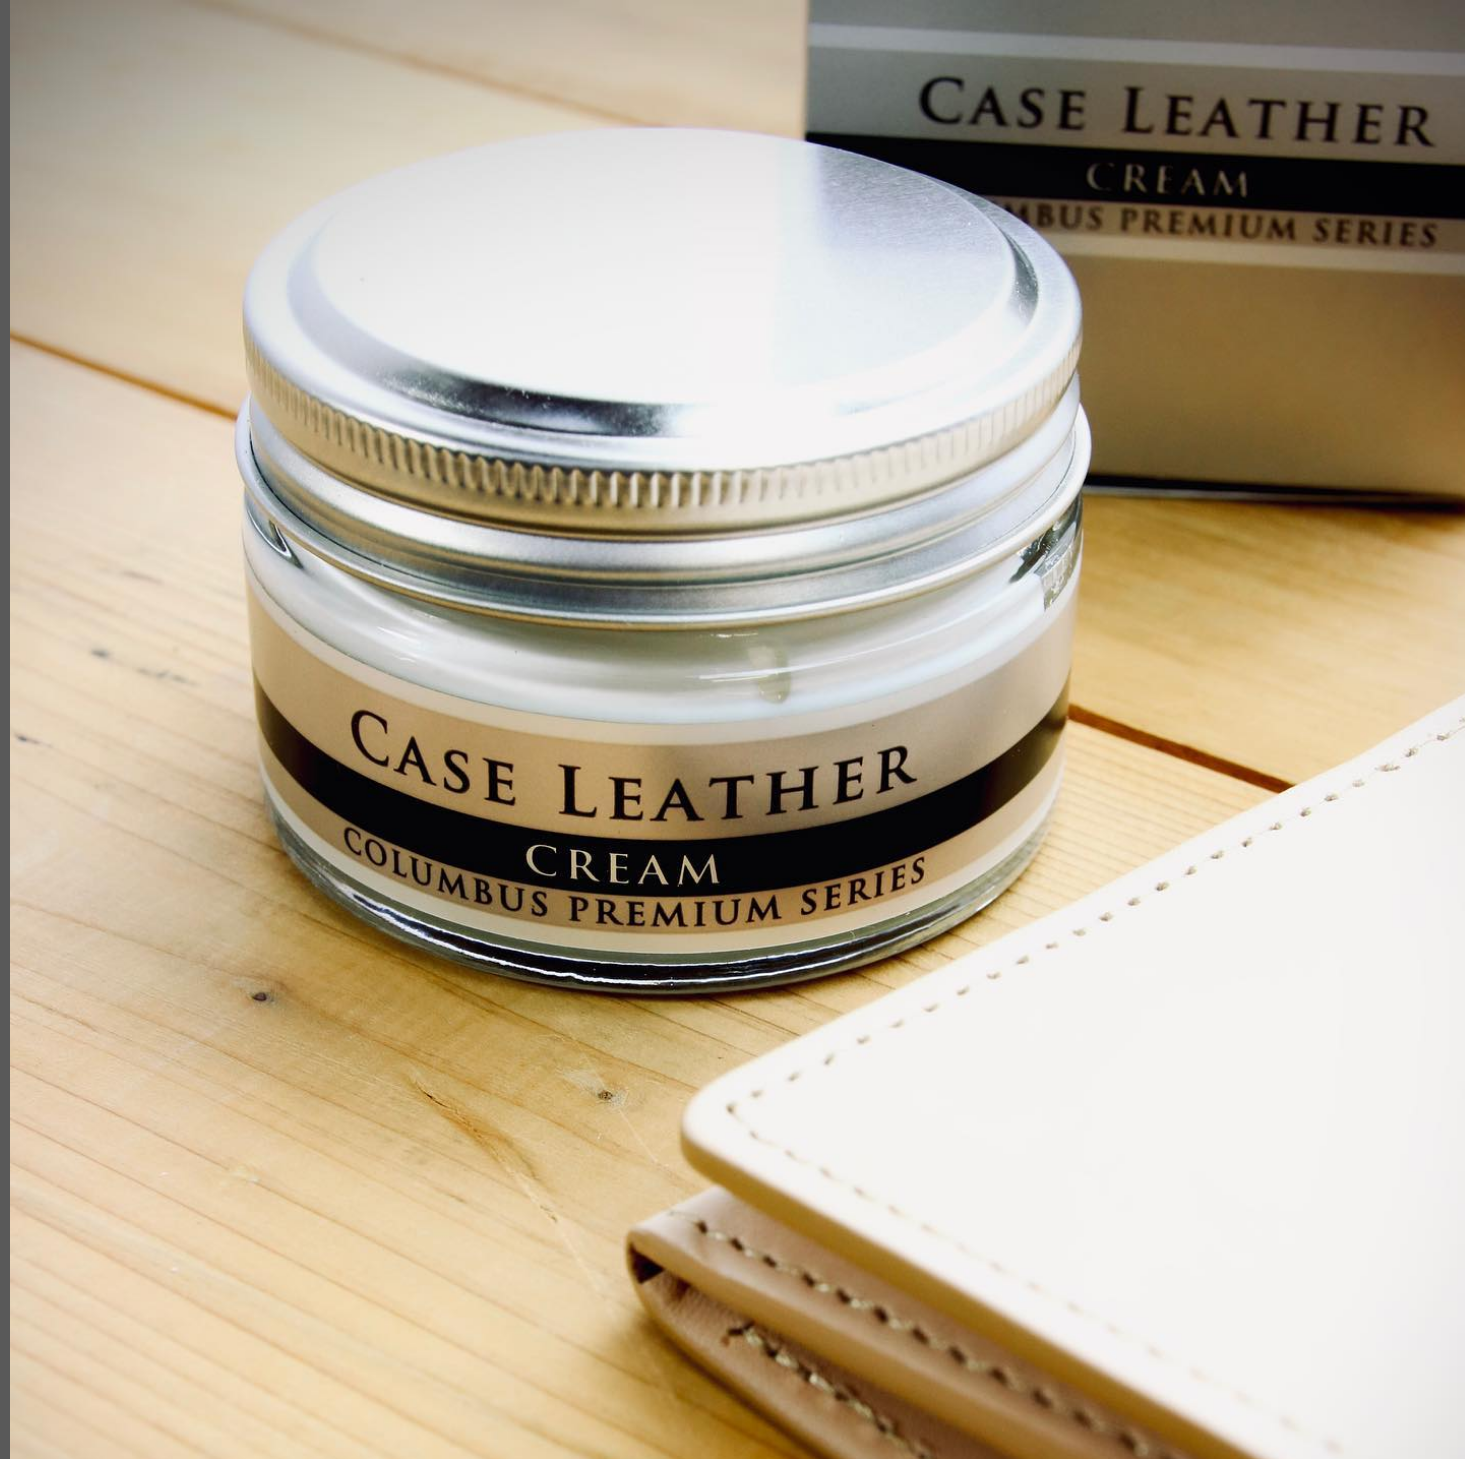 Case Leather Cream – for natural leather